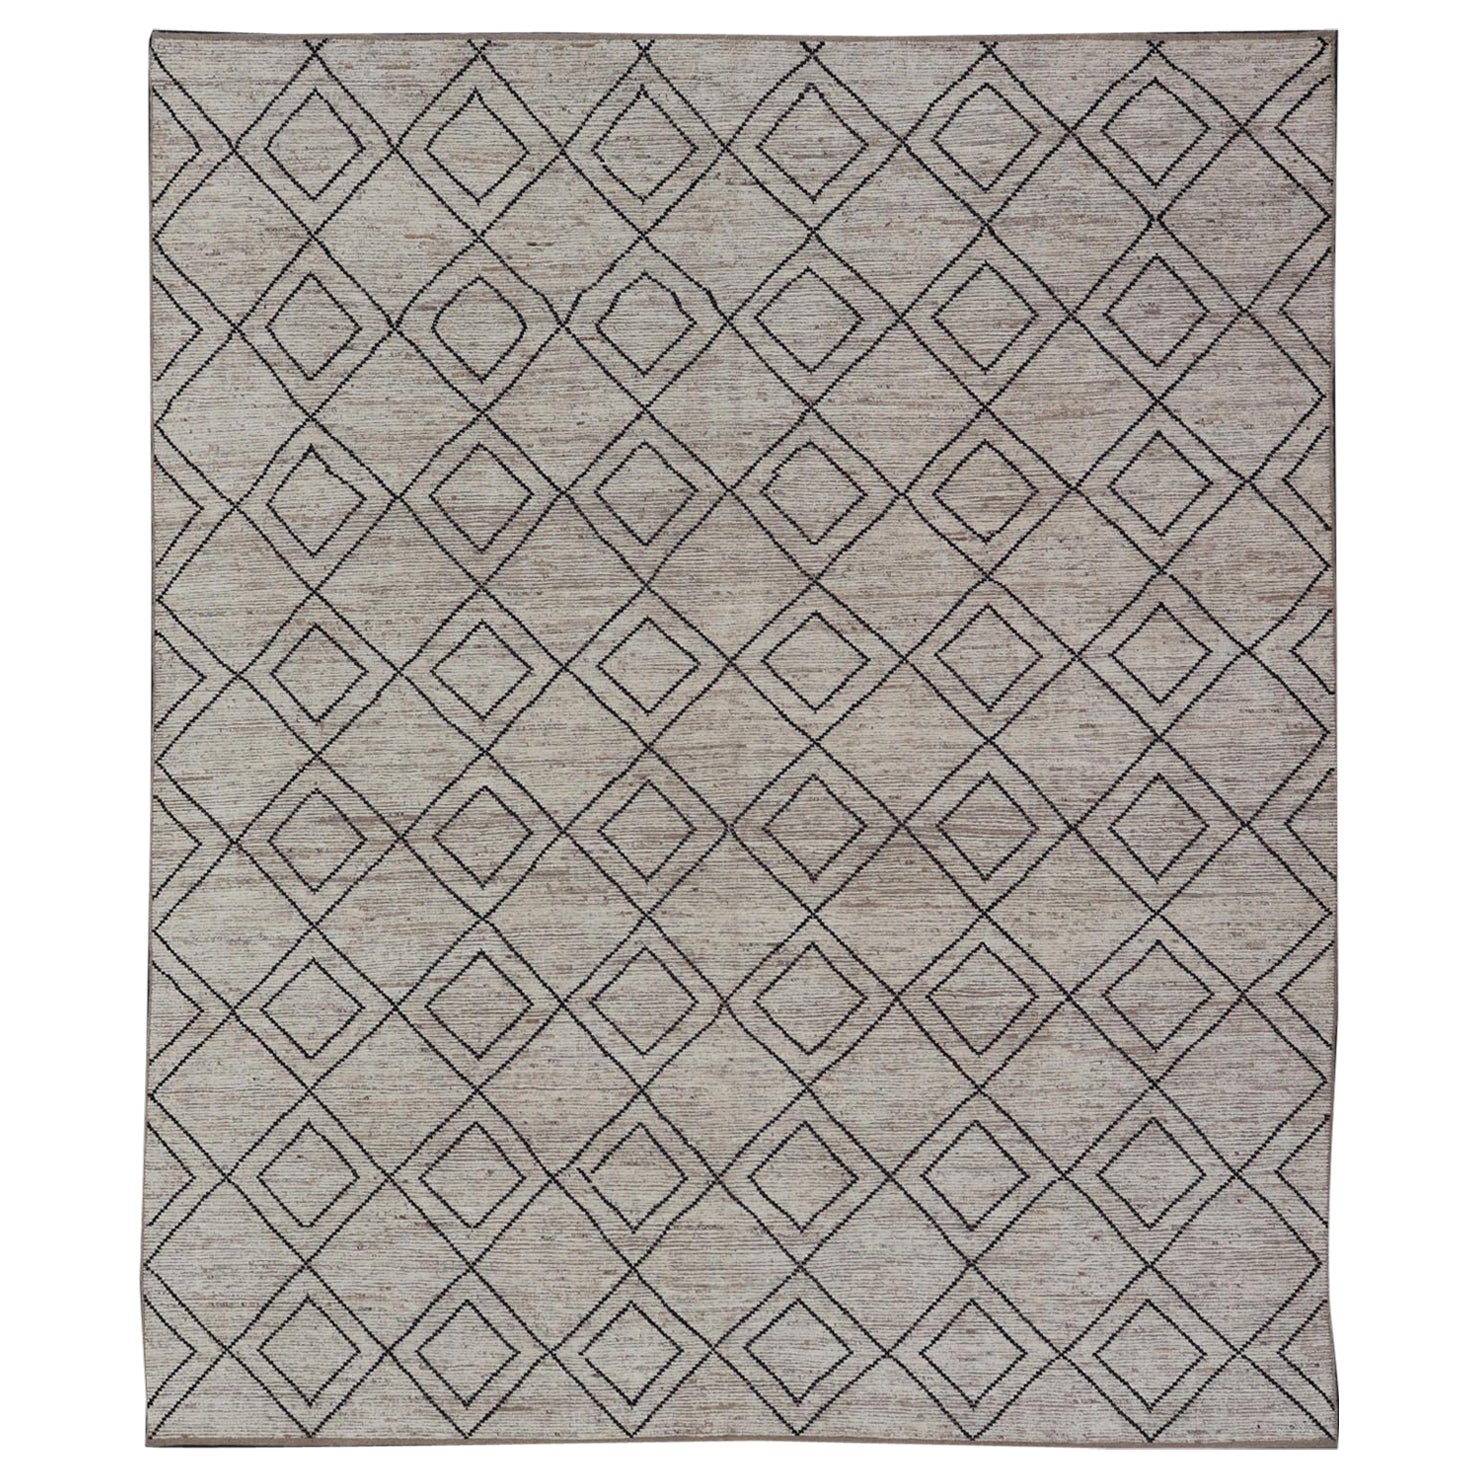 Large Modern Moroccan Rug with Tribal Diamond Design in Cream and Charcoal